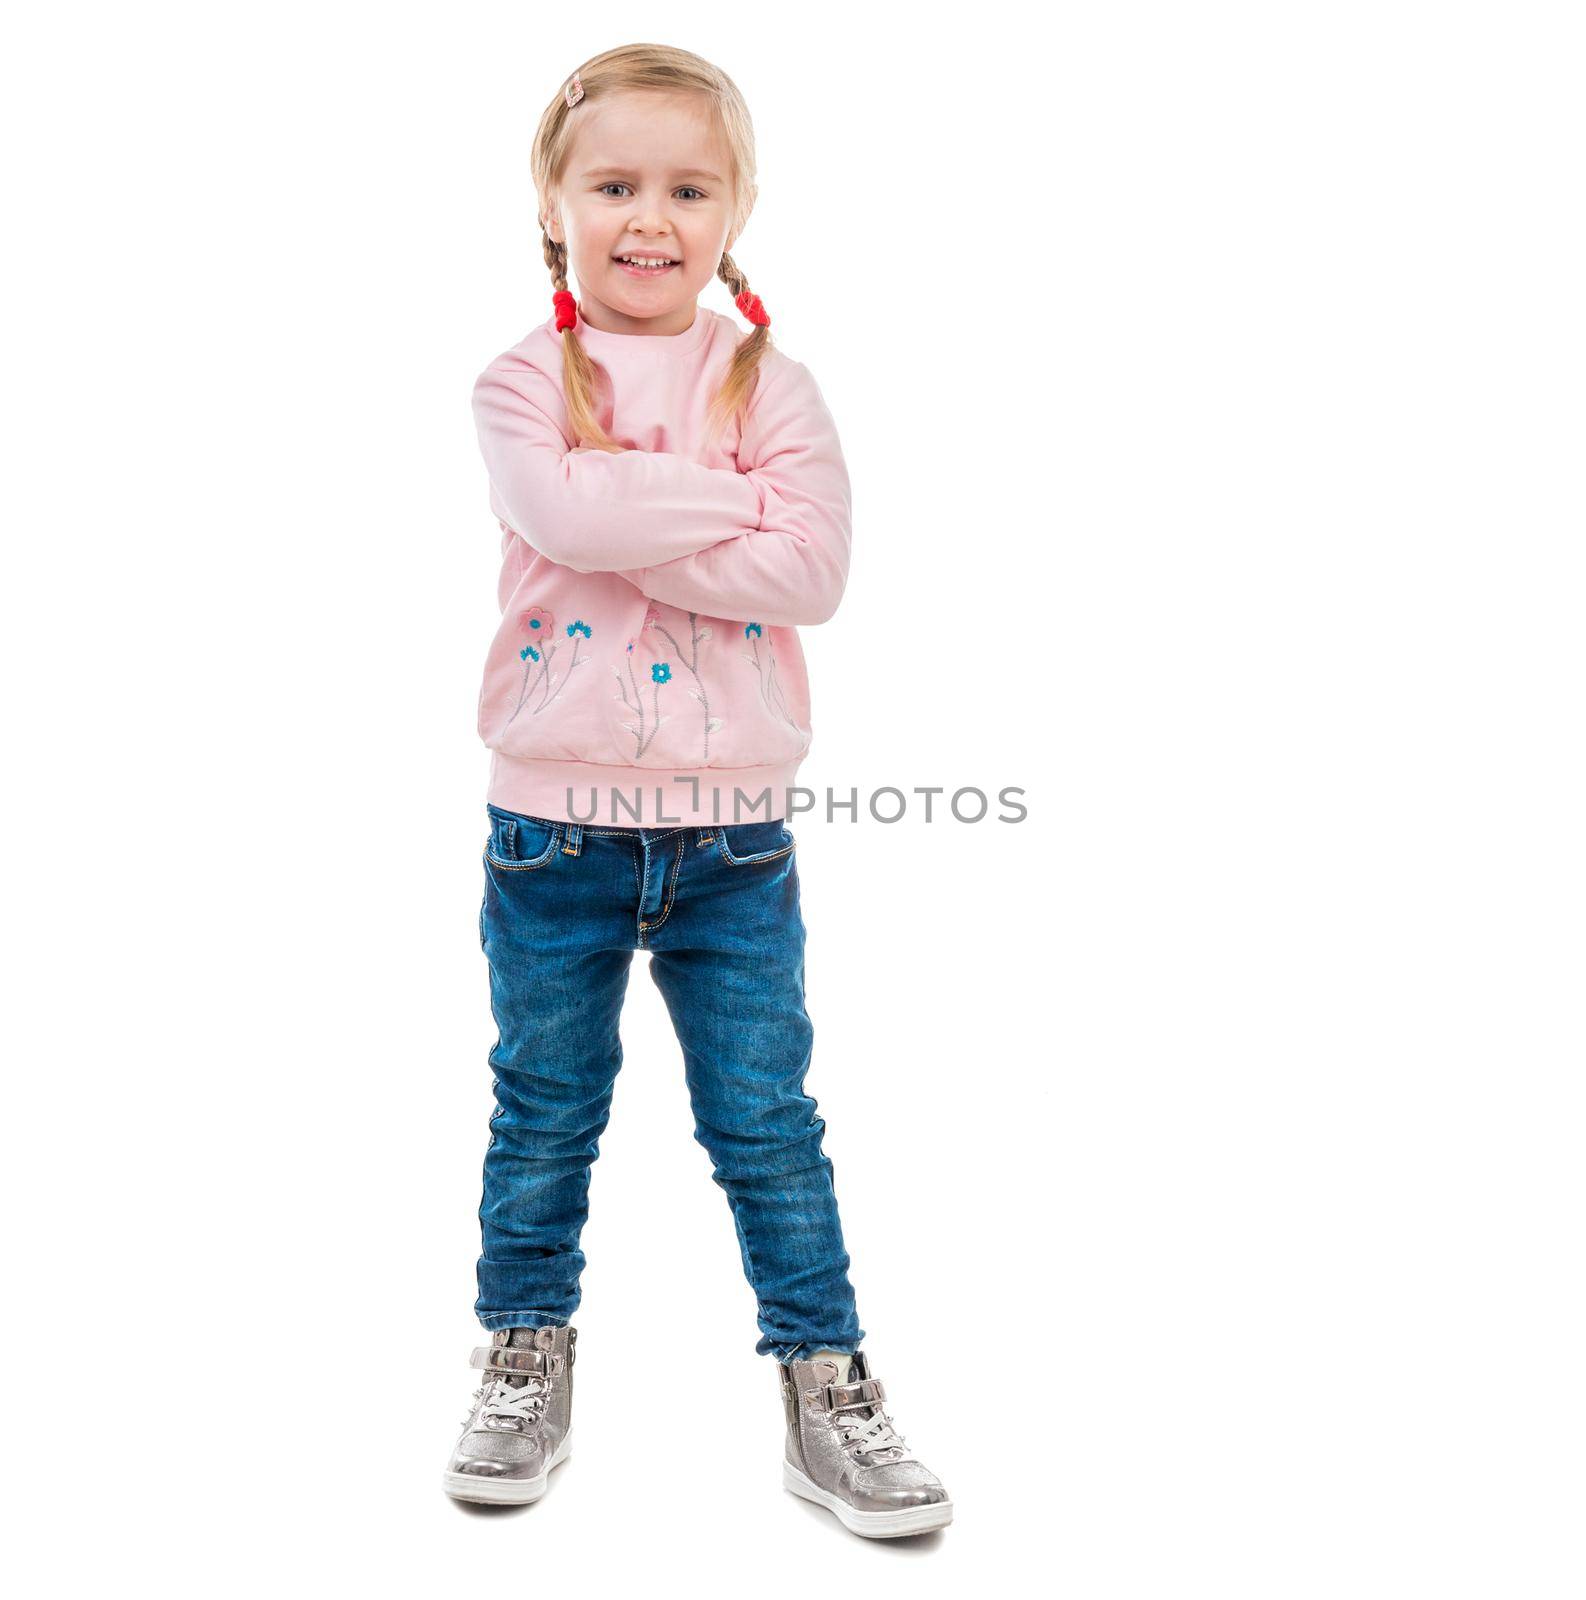 cute little girl with her hands in pockets, isolated on white background